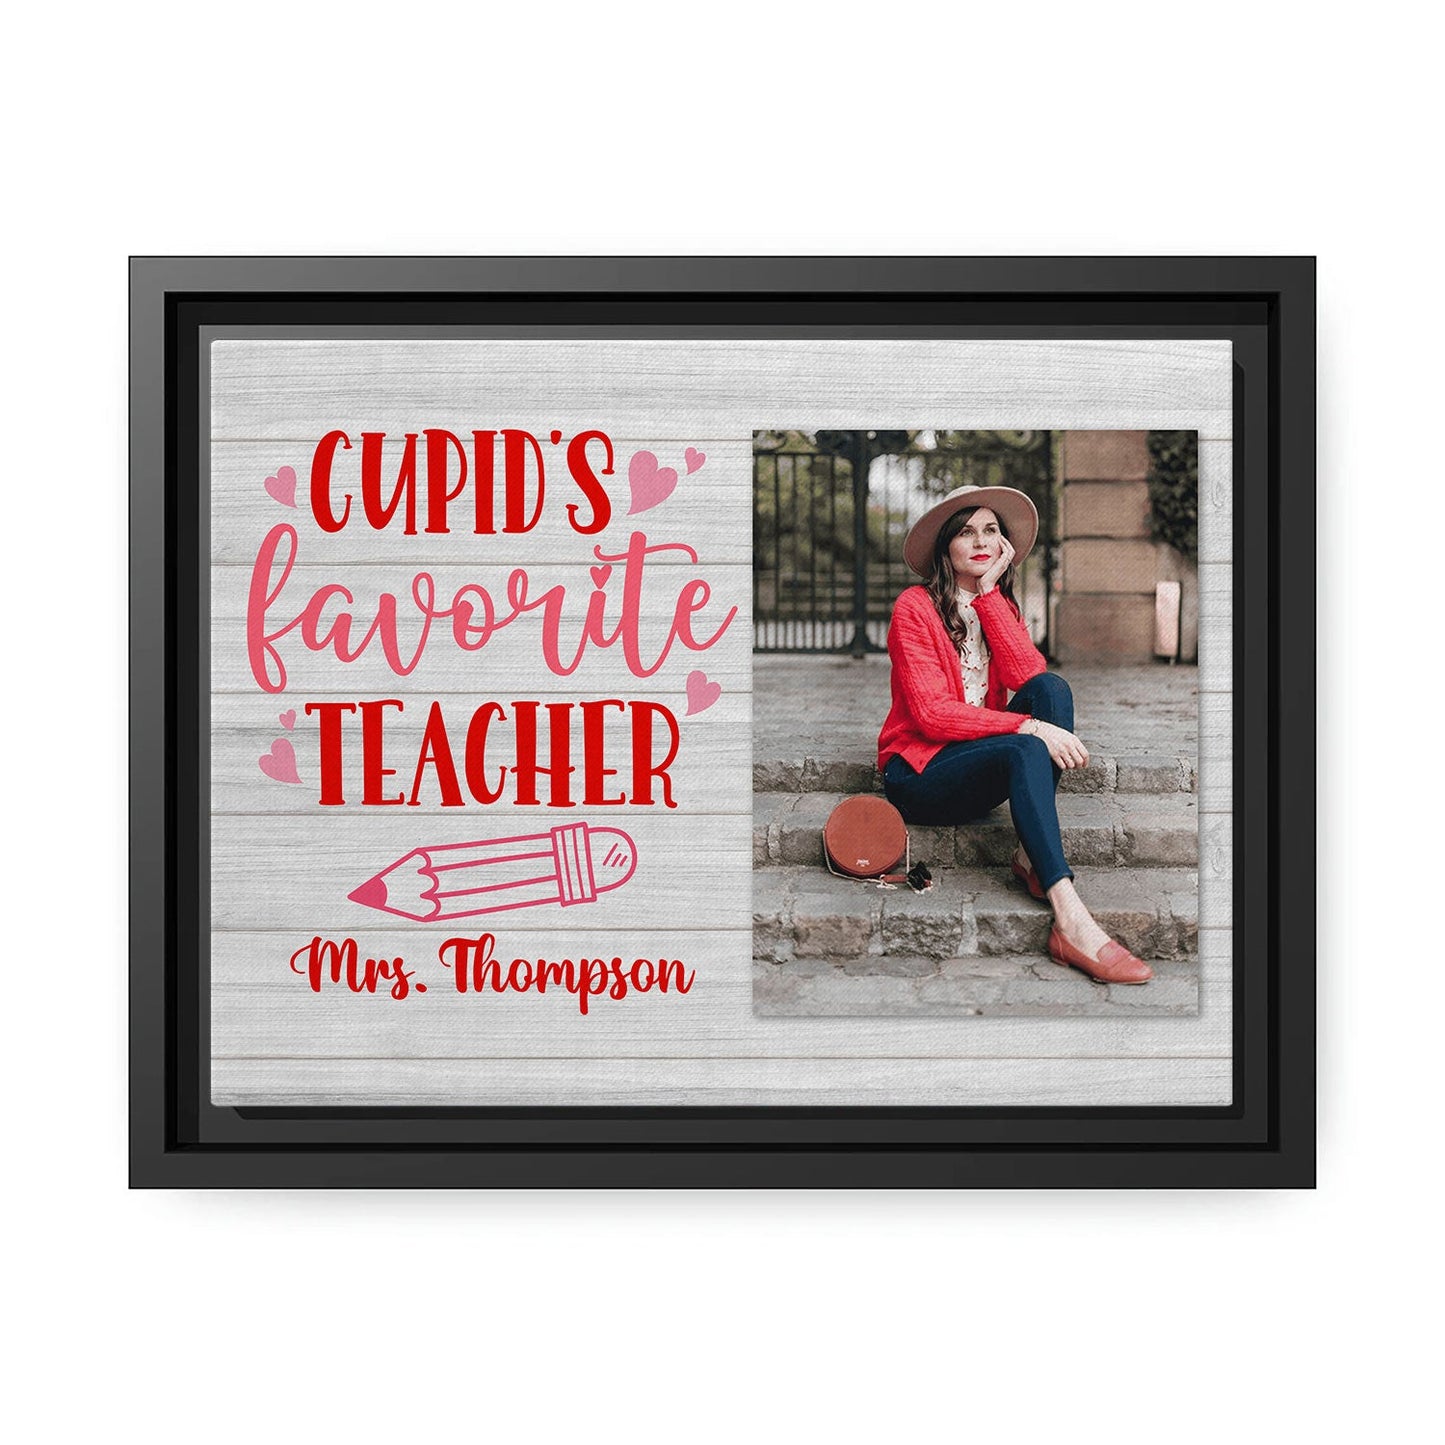 Cupid's Favorite Teacher - Personalized Valentine's Day gift For Teacher - Custom Canvas Print - MyMindfulGifts